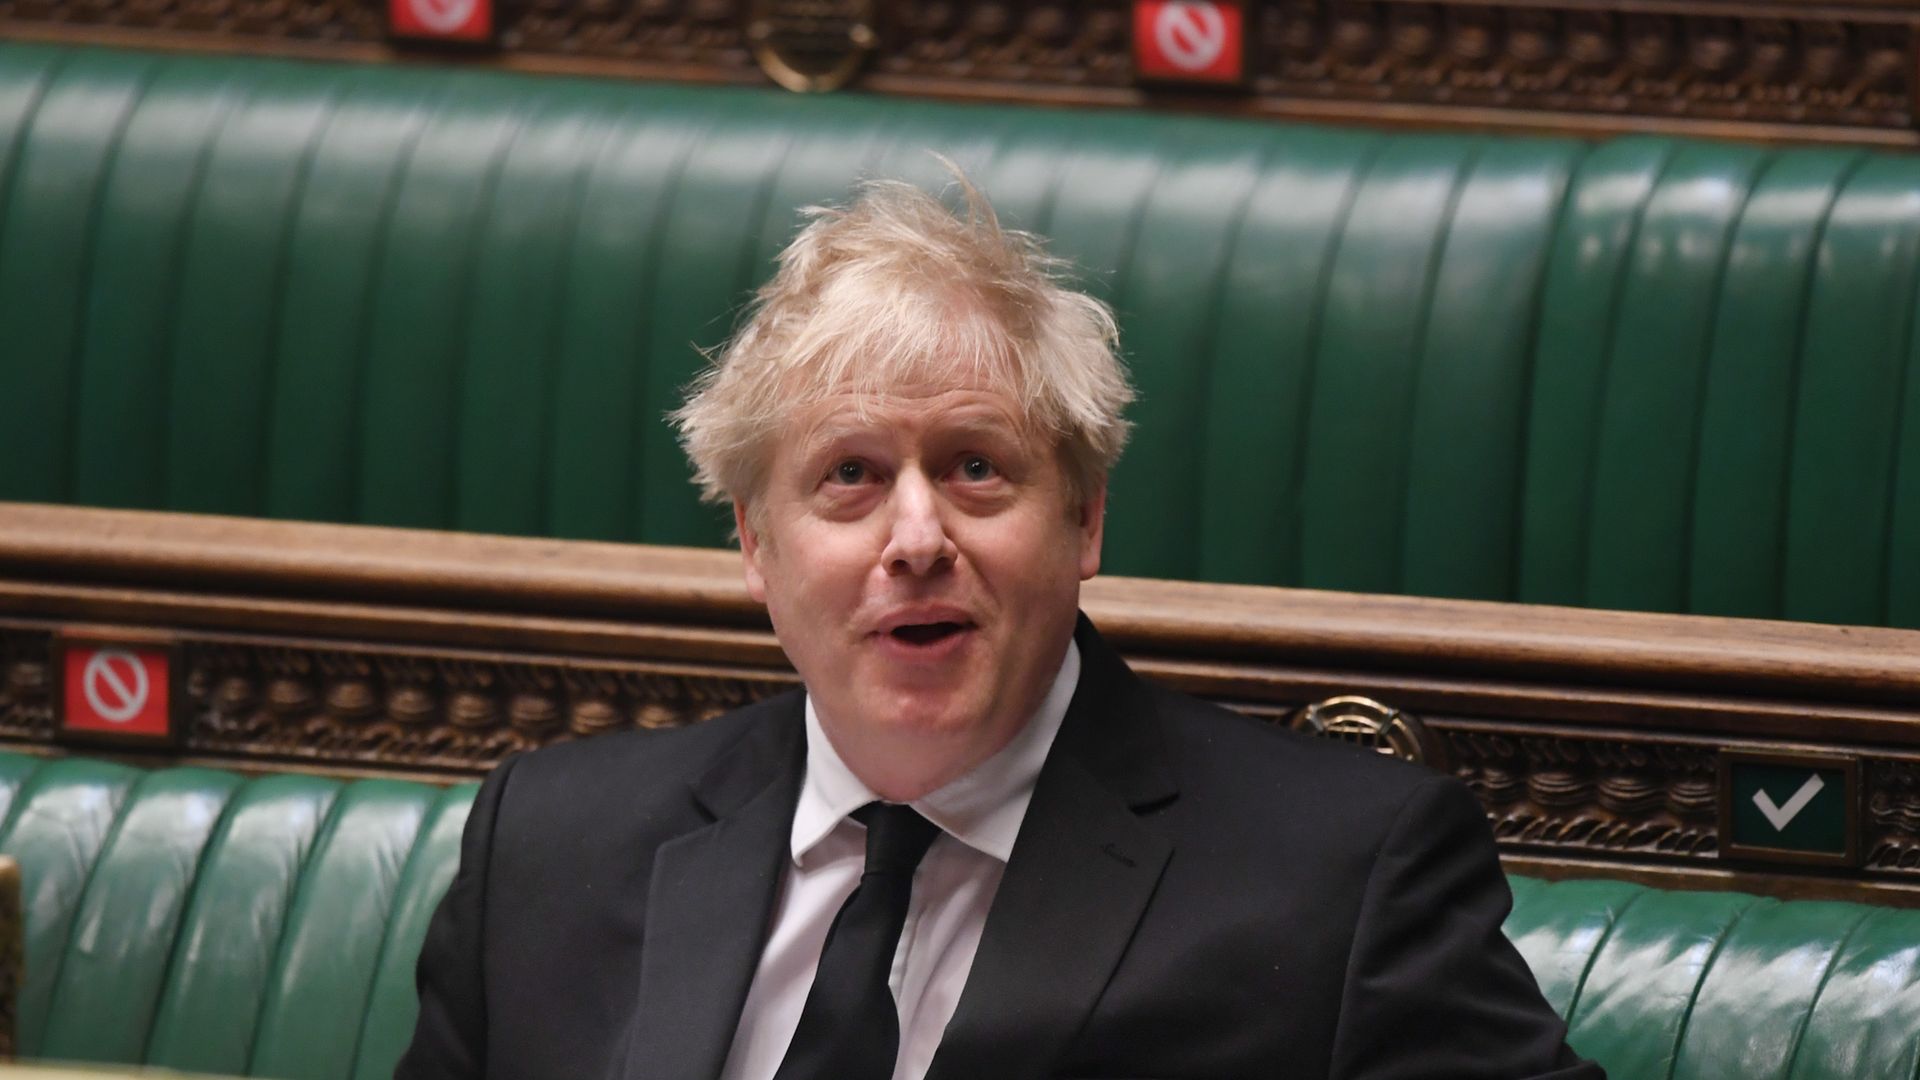 Boris Johnson in the House of Commons - Credit: PA